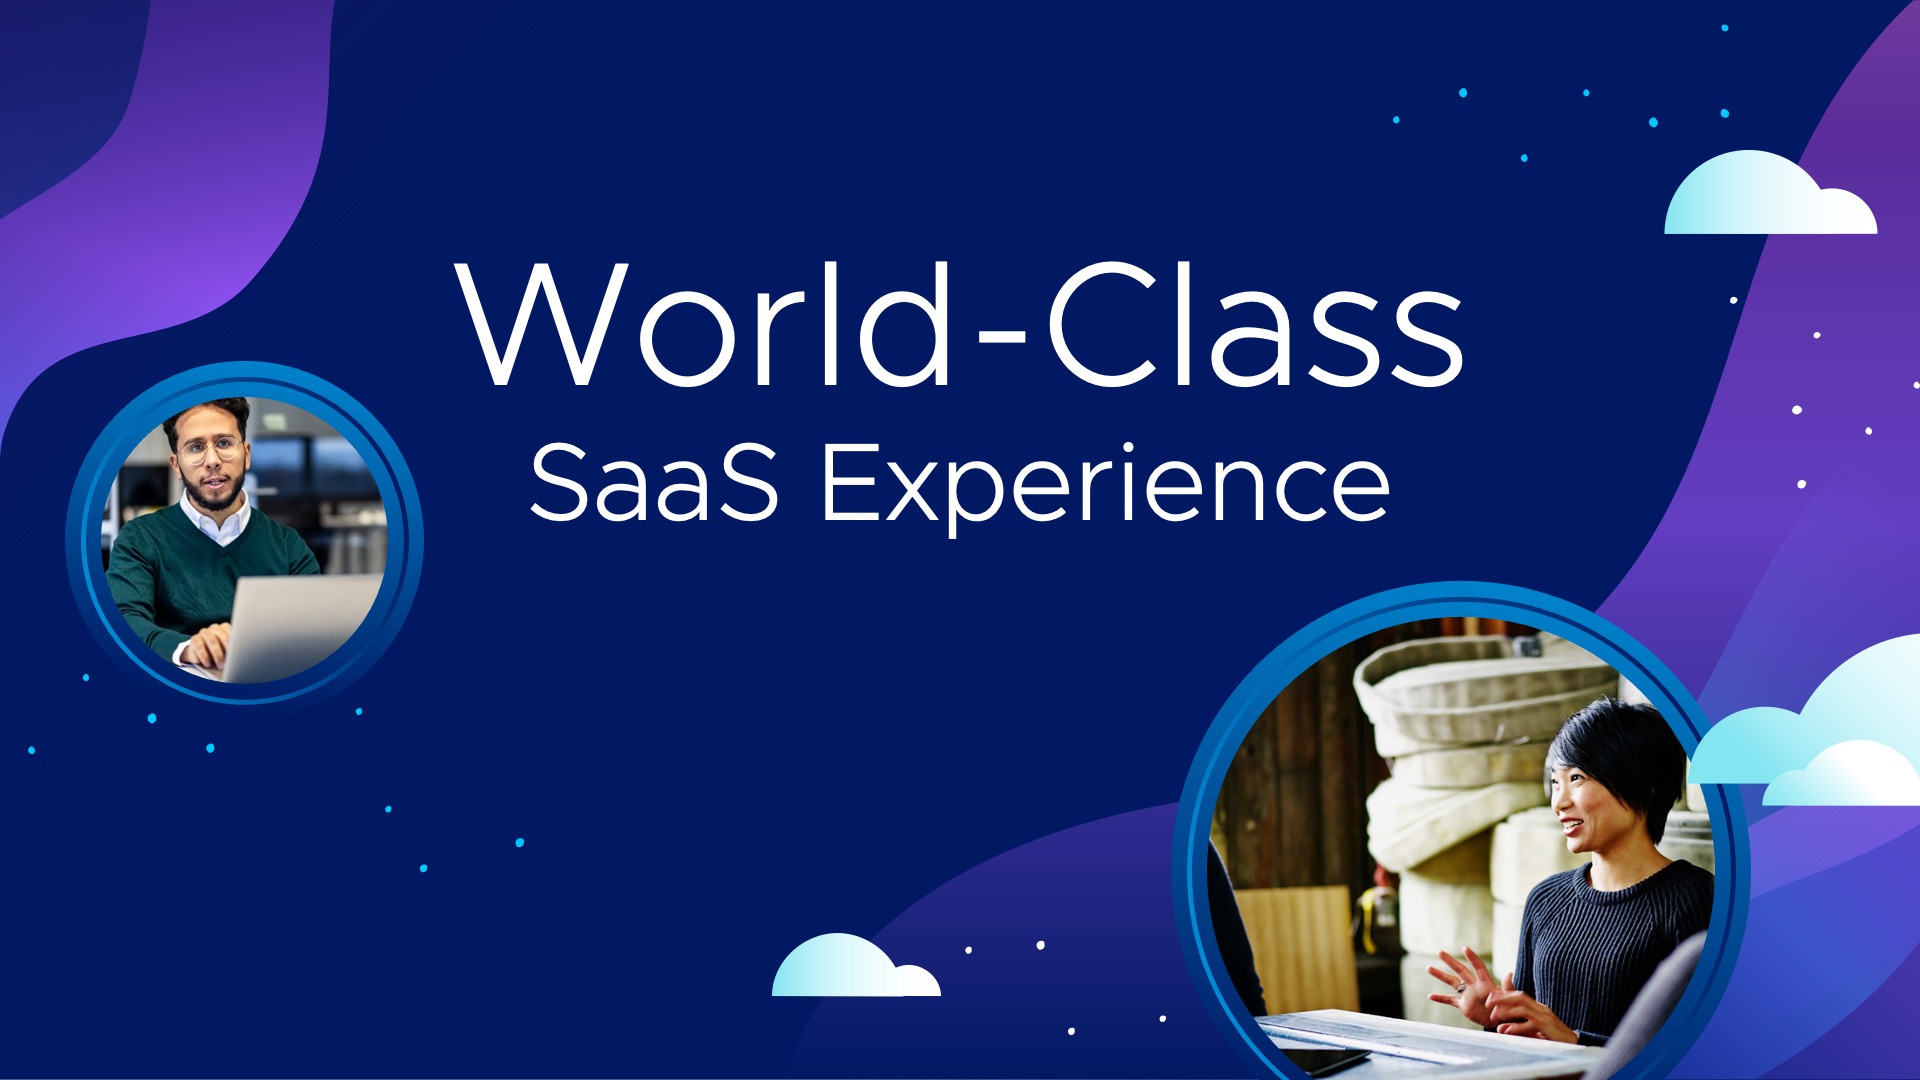 A design for a VMware event presentation that has clouds and photos of people working. Text says "World-class SaaS experience"